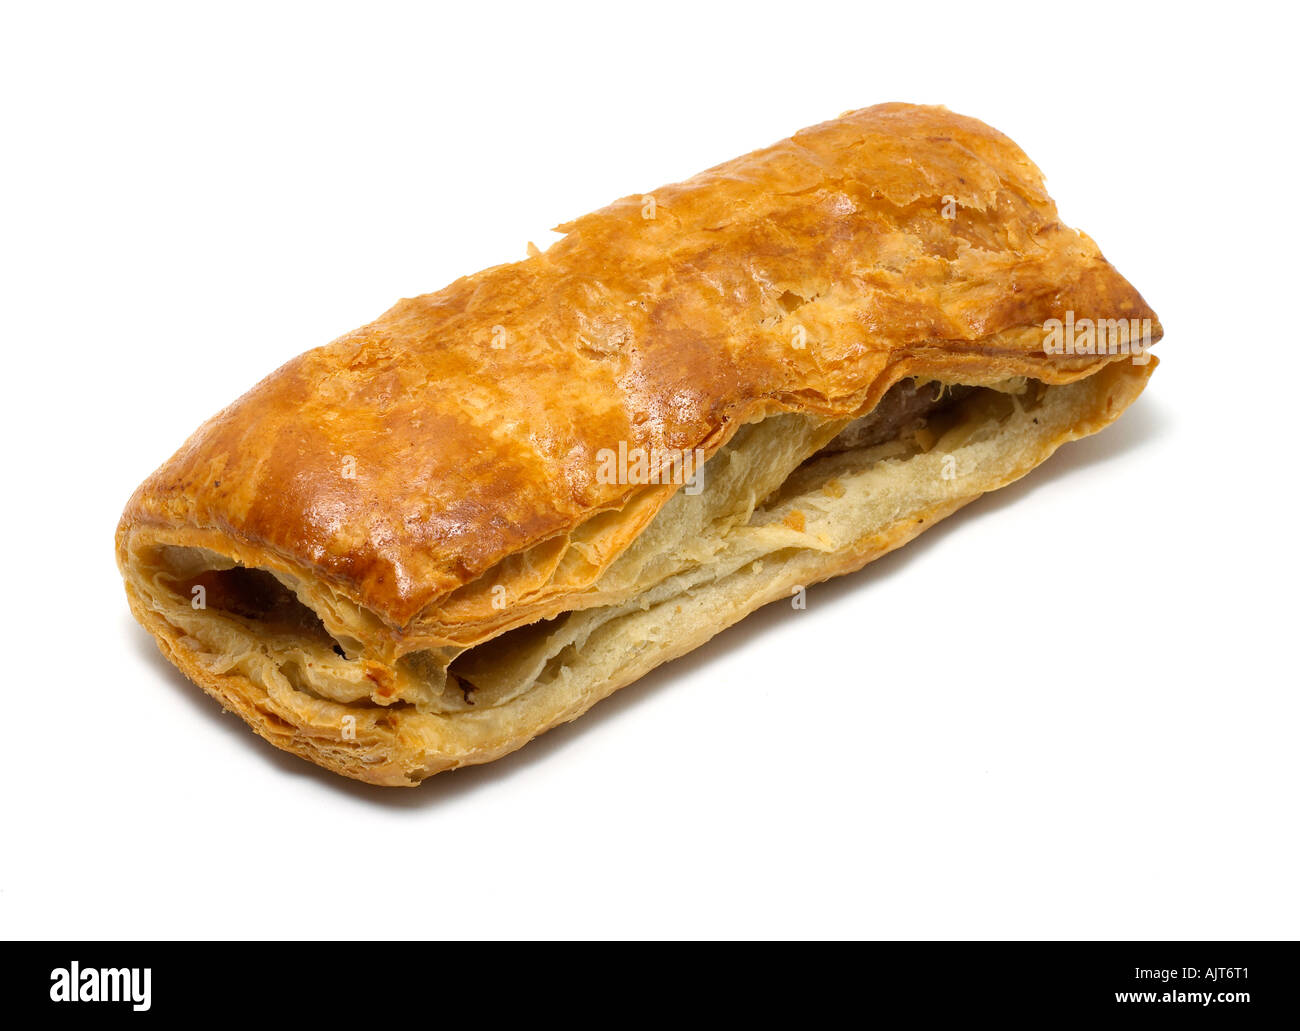 Greggs bakers sausage Cut Out Stock Images & Pictures - Alamy